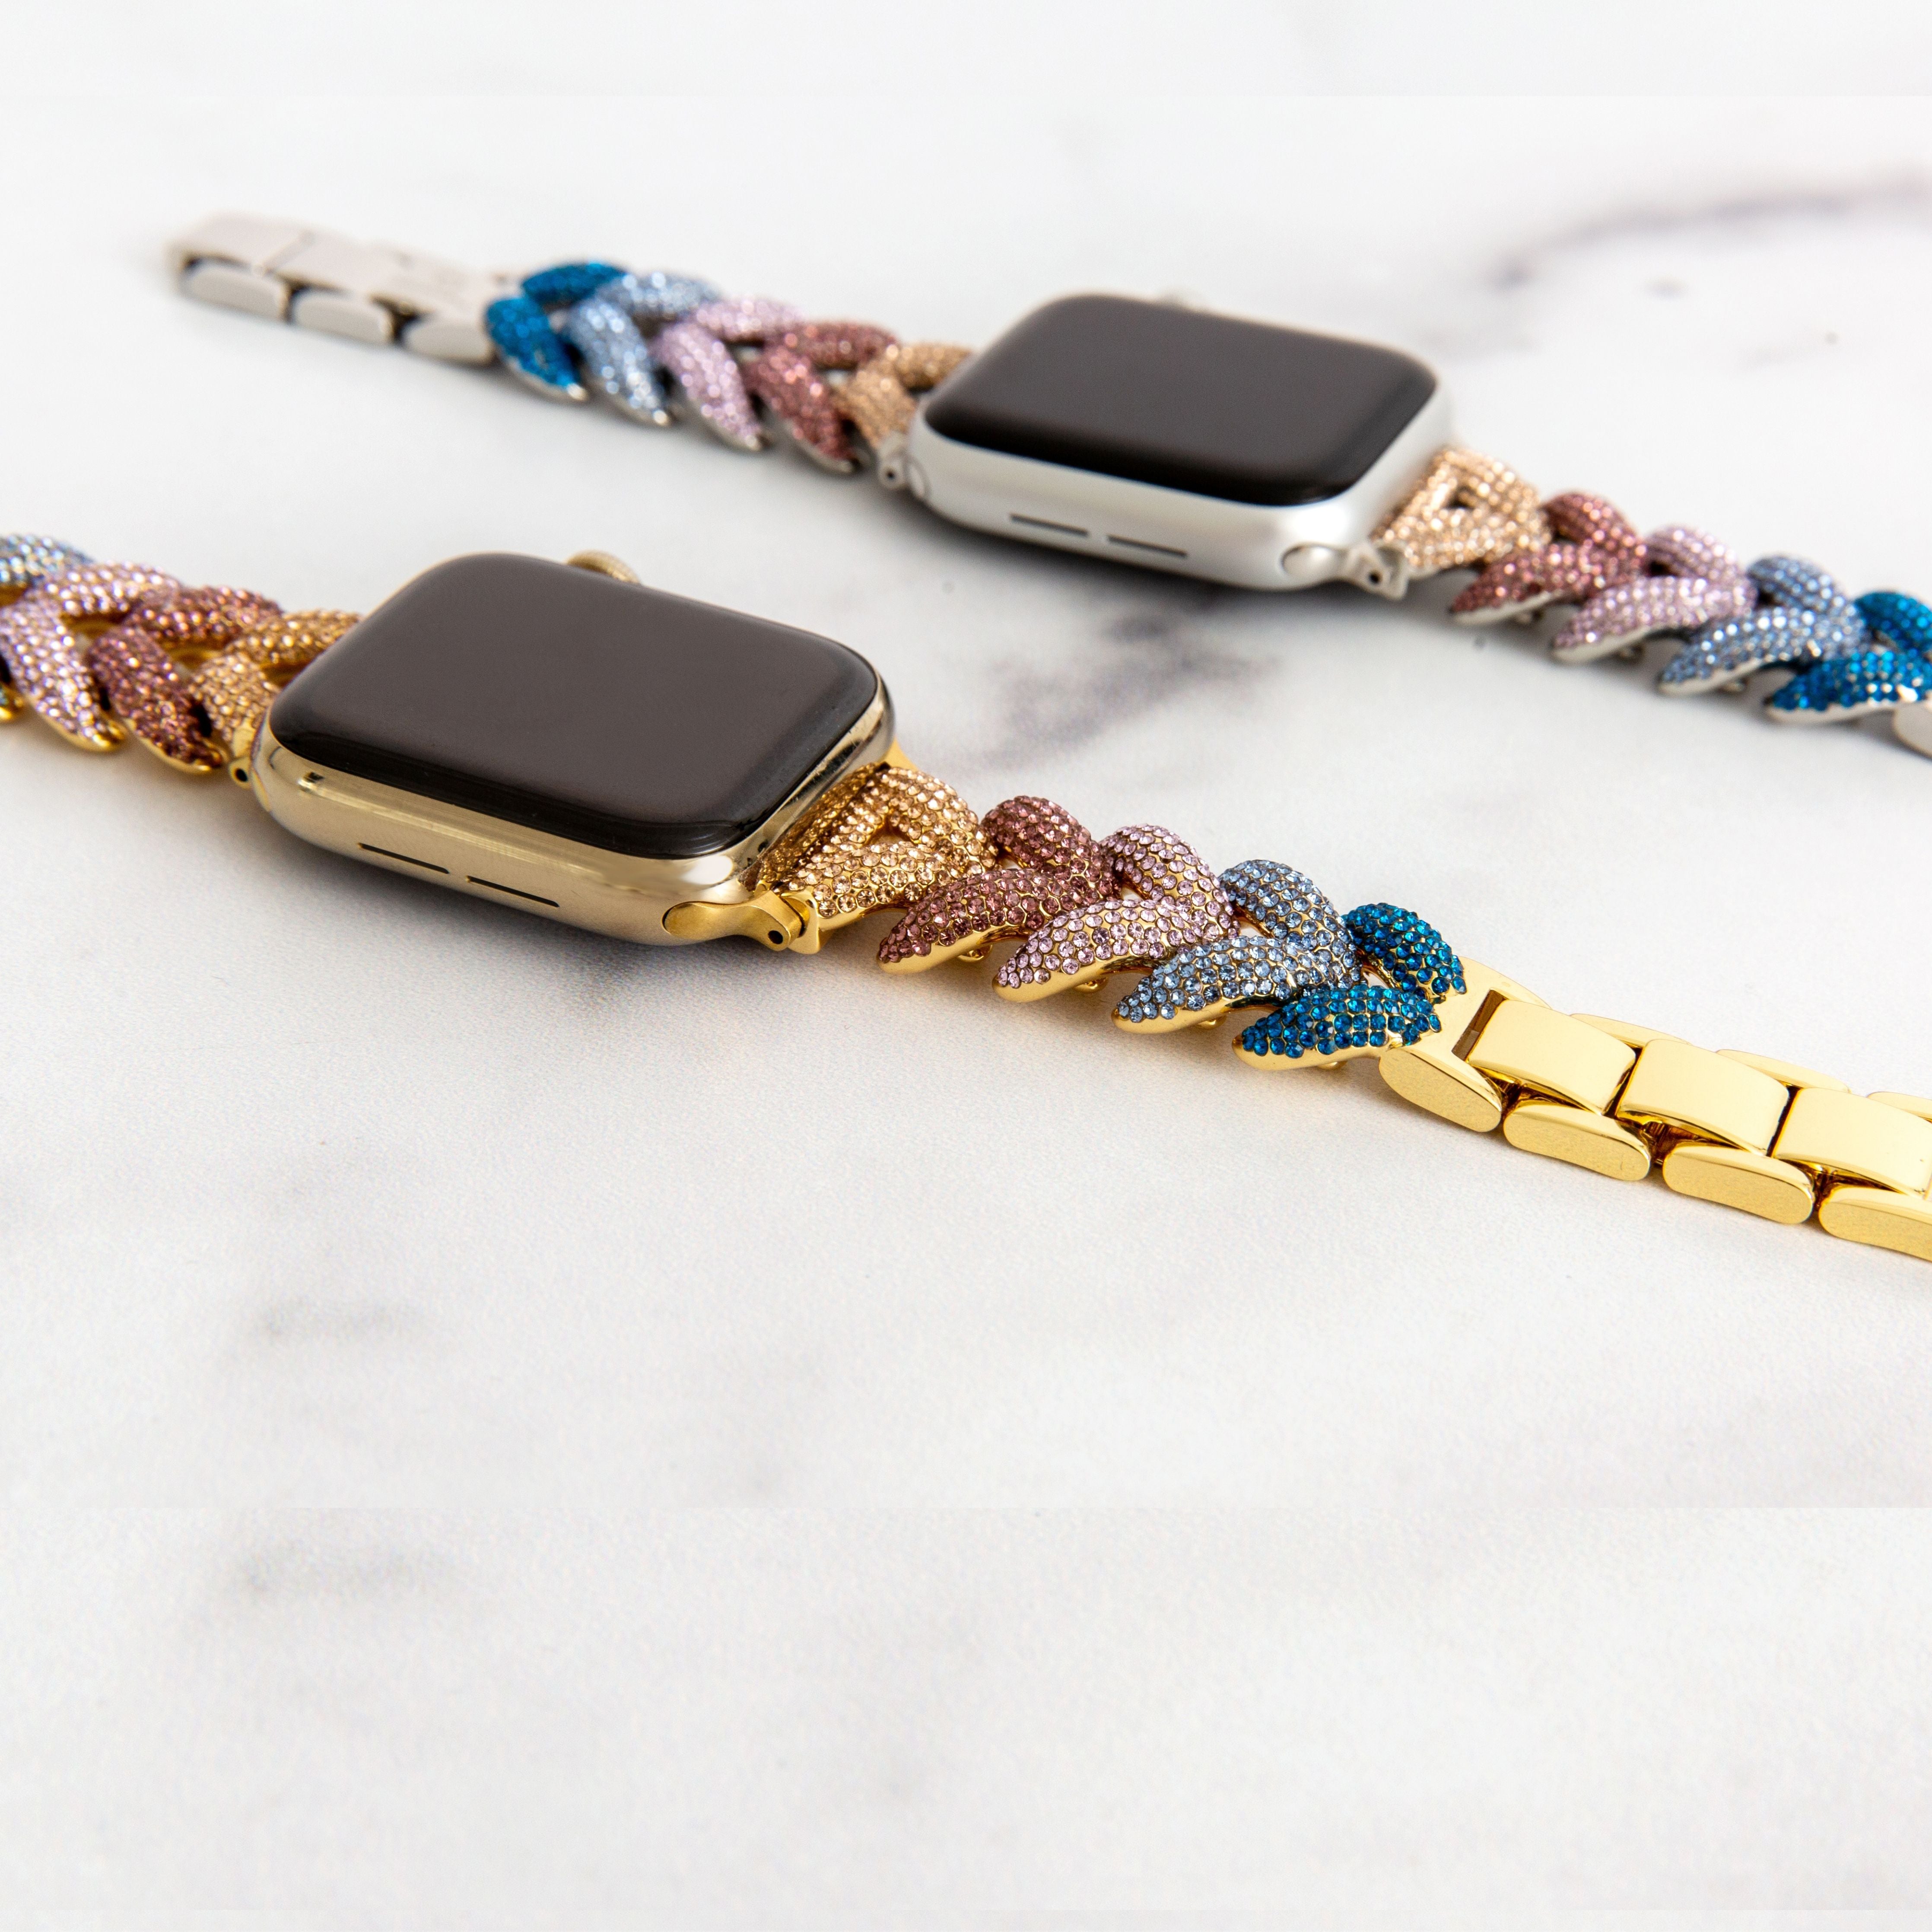 Ombrè Herringbone Band for the Apple Watch - Goldenerre Women's Apple Watch Bands and Jewelry